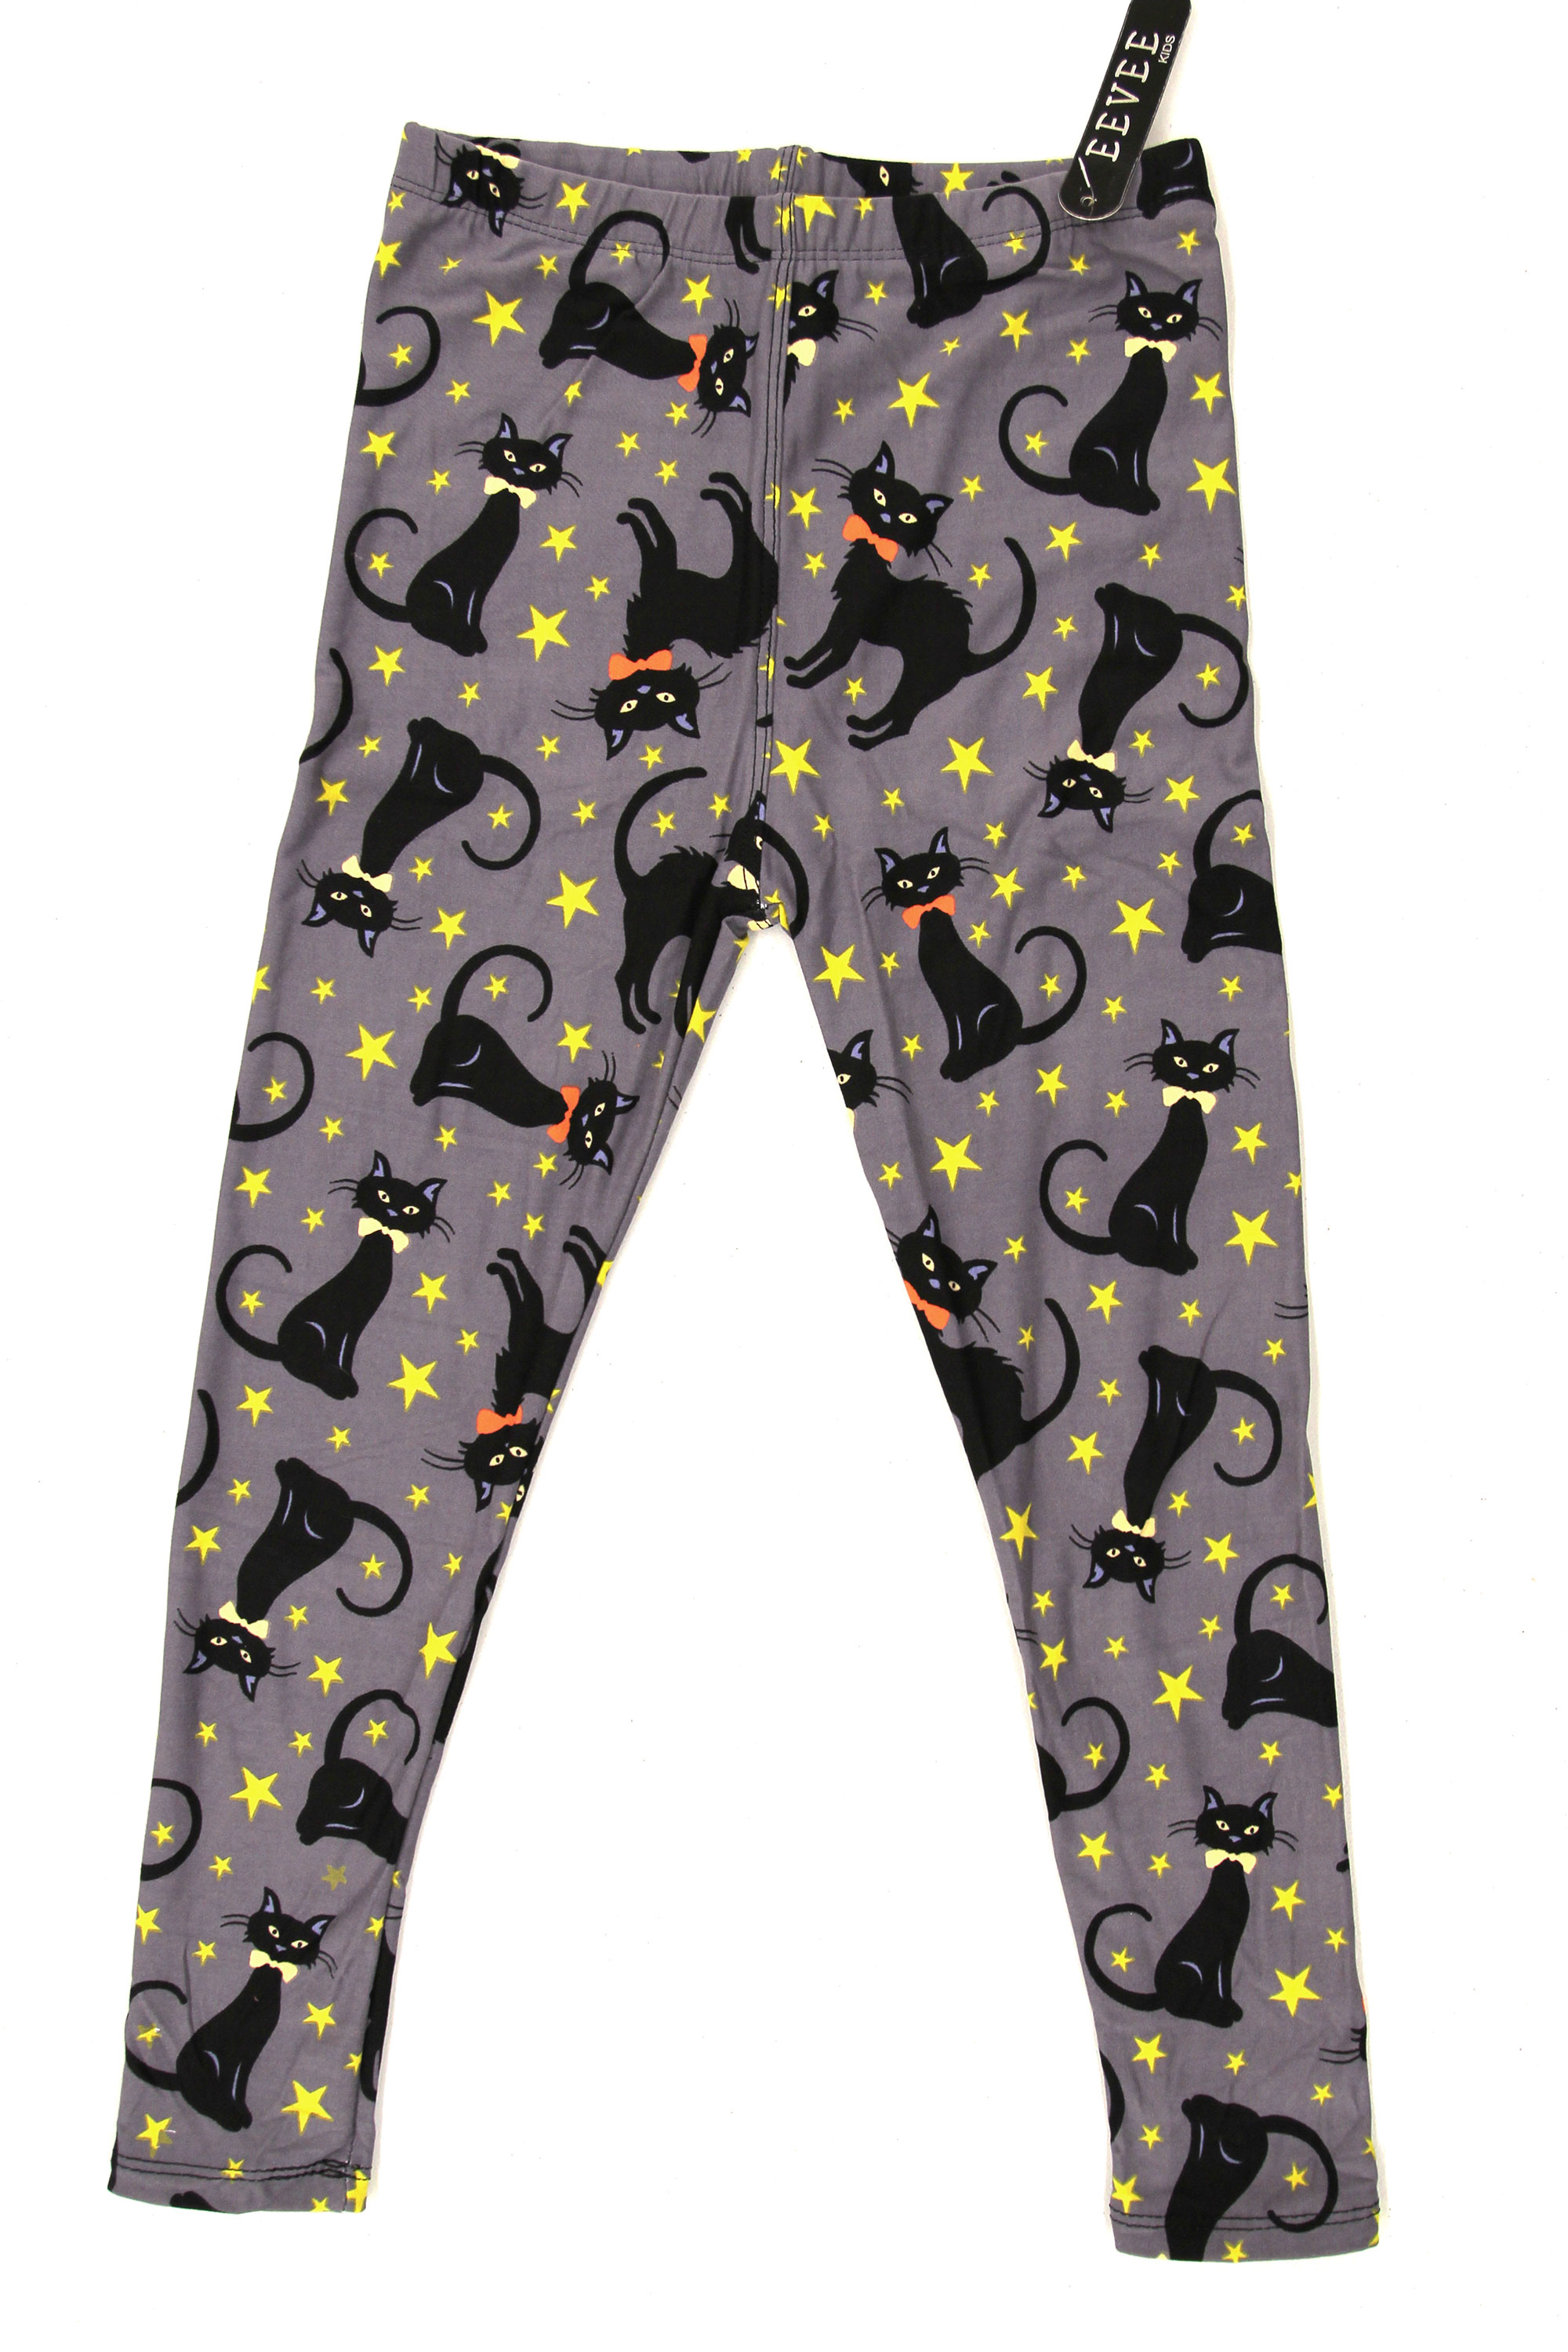 Wholesale Buttery Soft Bow-tie Black Kitty Cats Kids Leggings